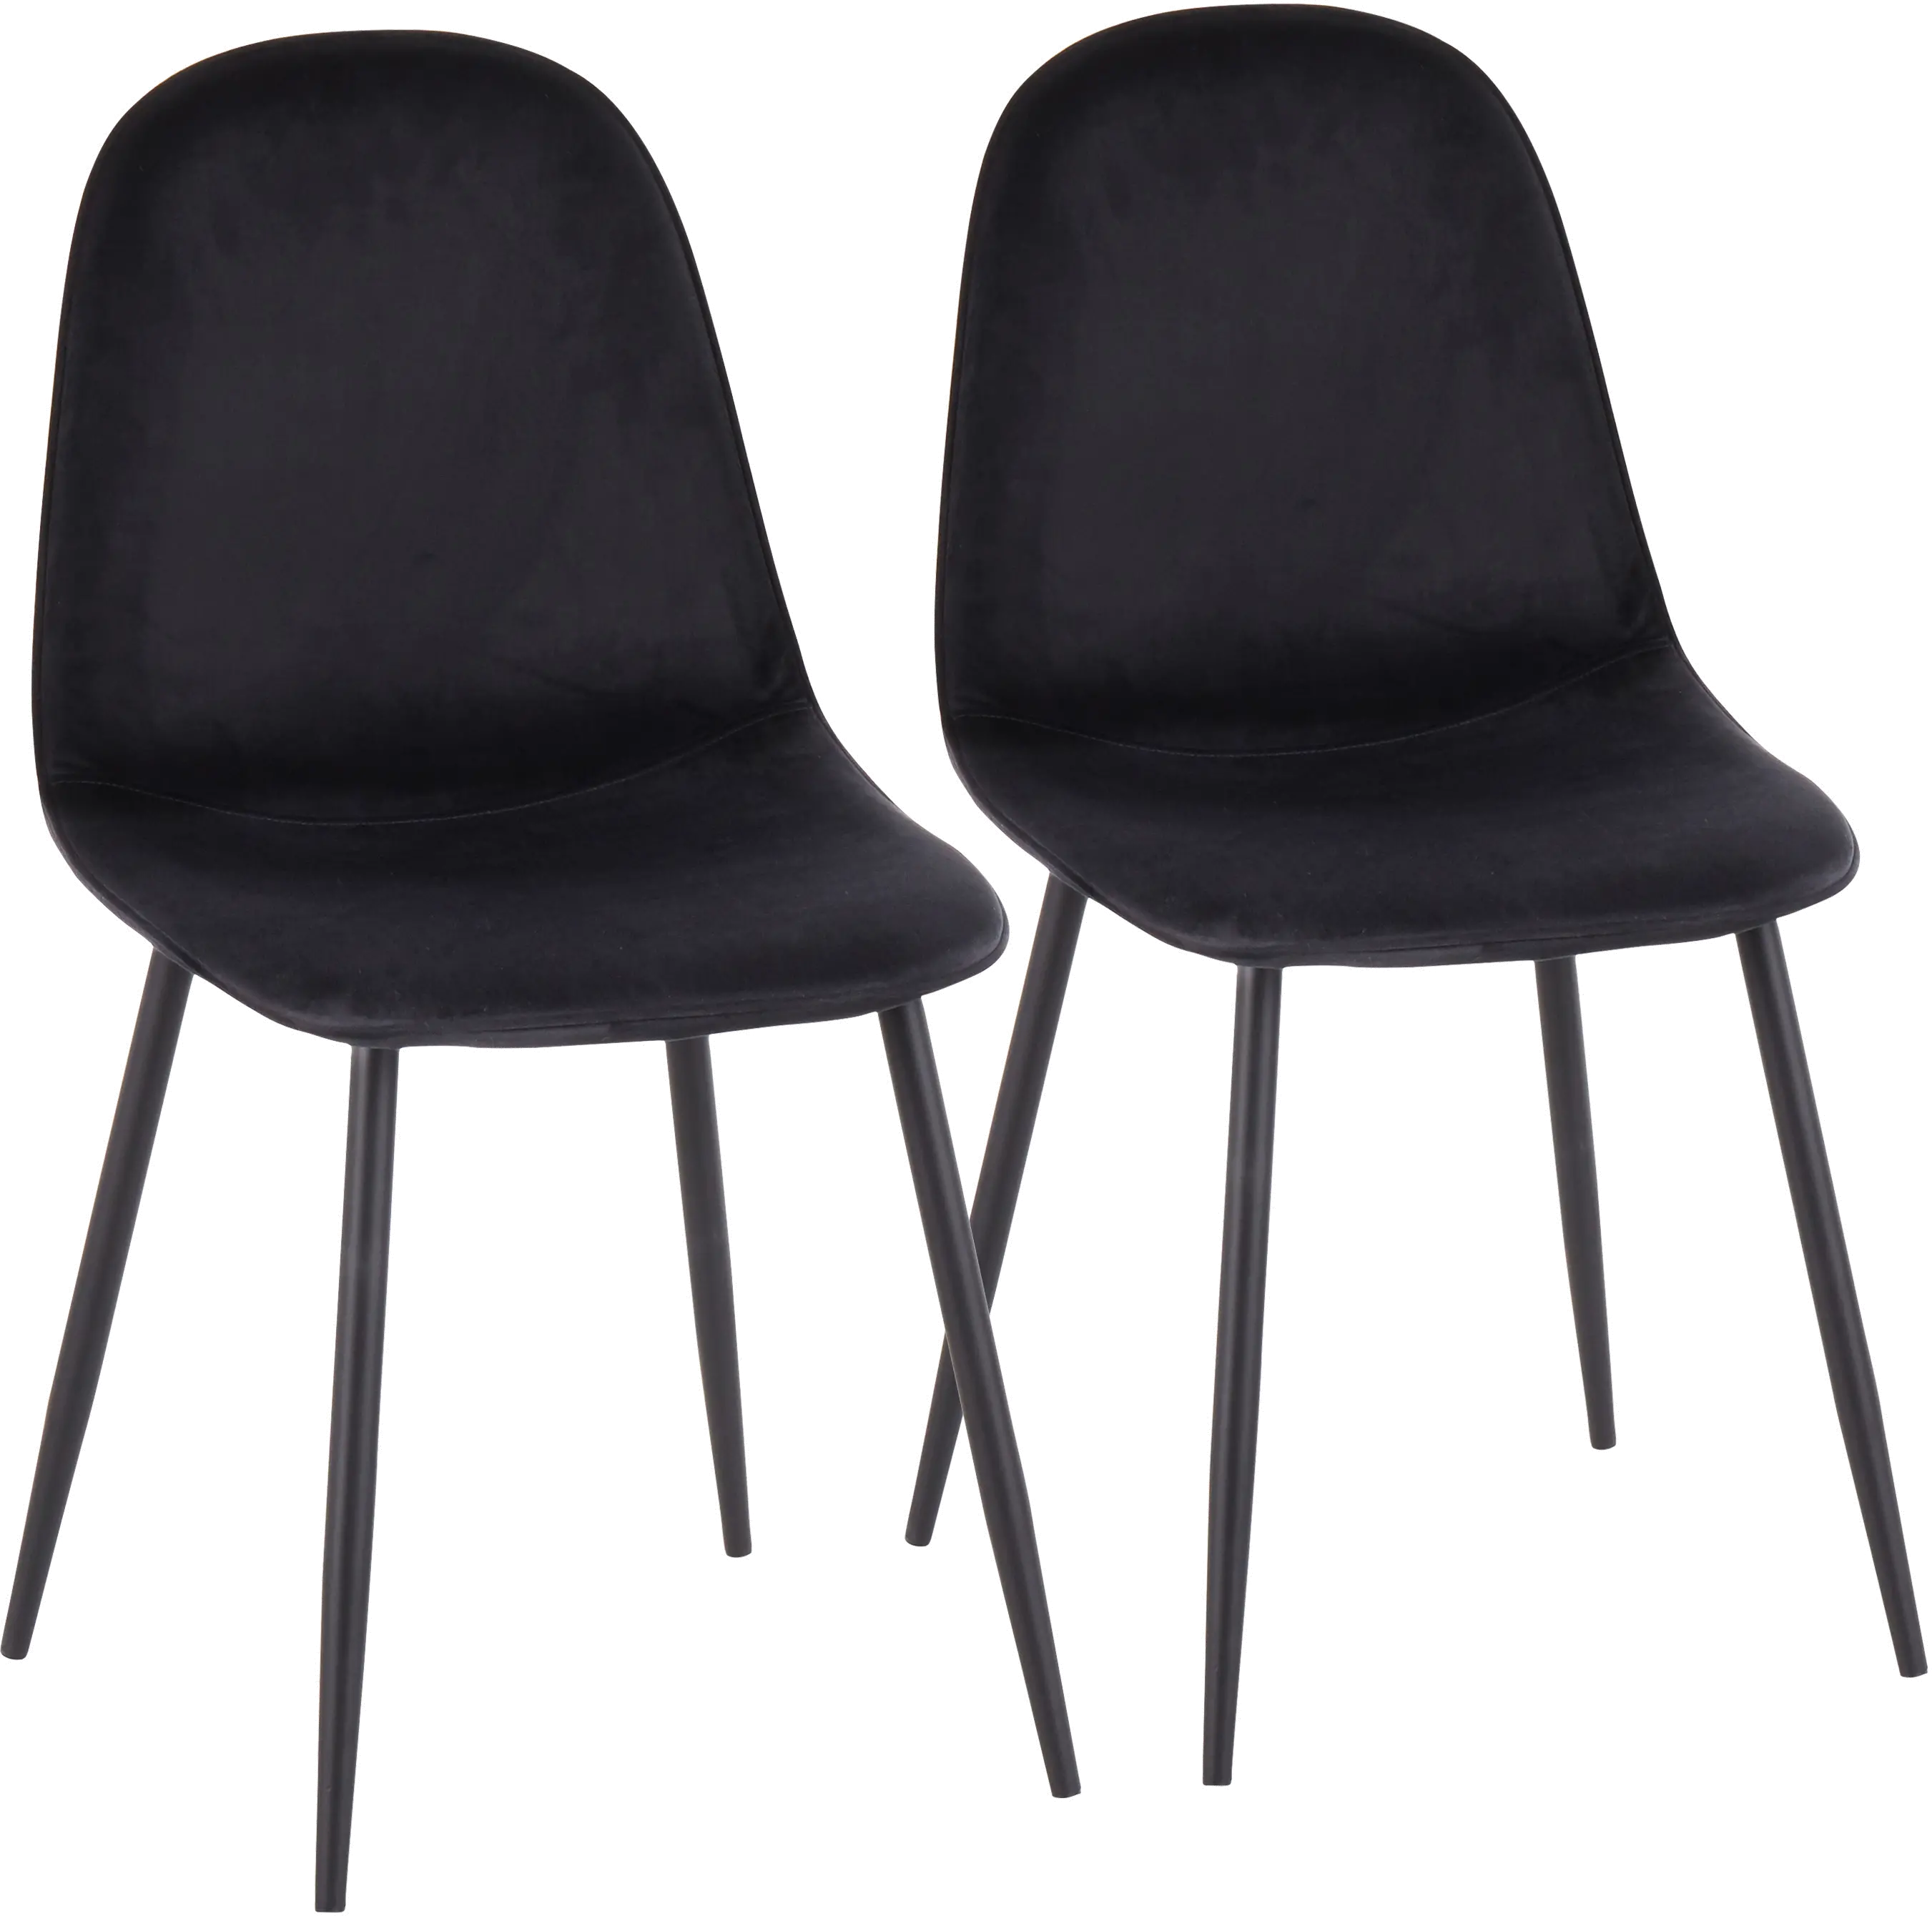 Photos - Chair Lumisource Contemporary Black Dining Room   - Pebble CH-PEB(Set of 2)